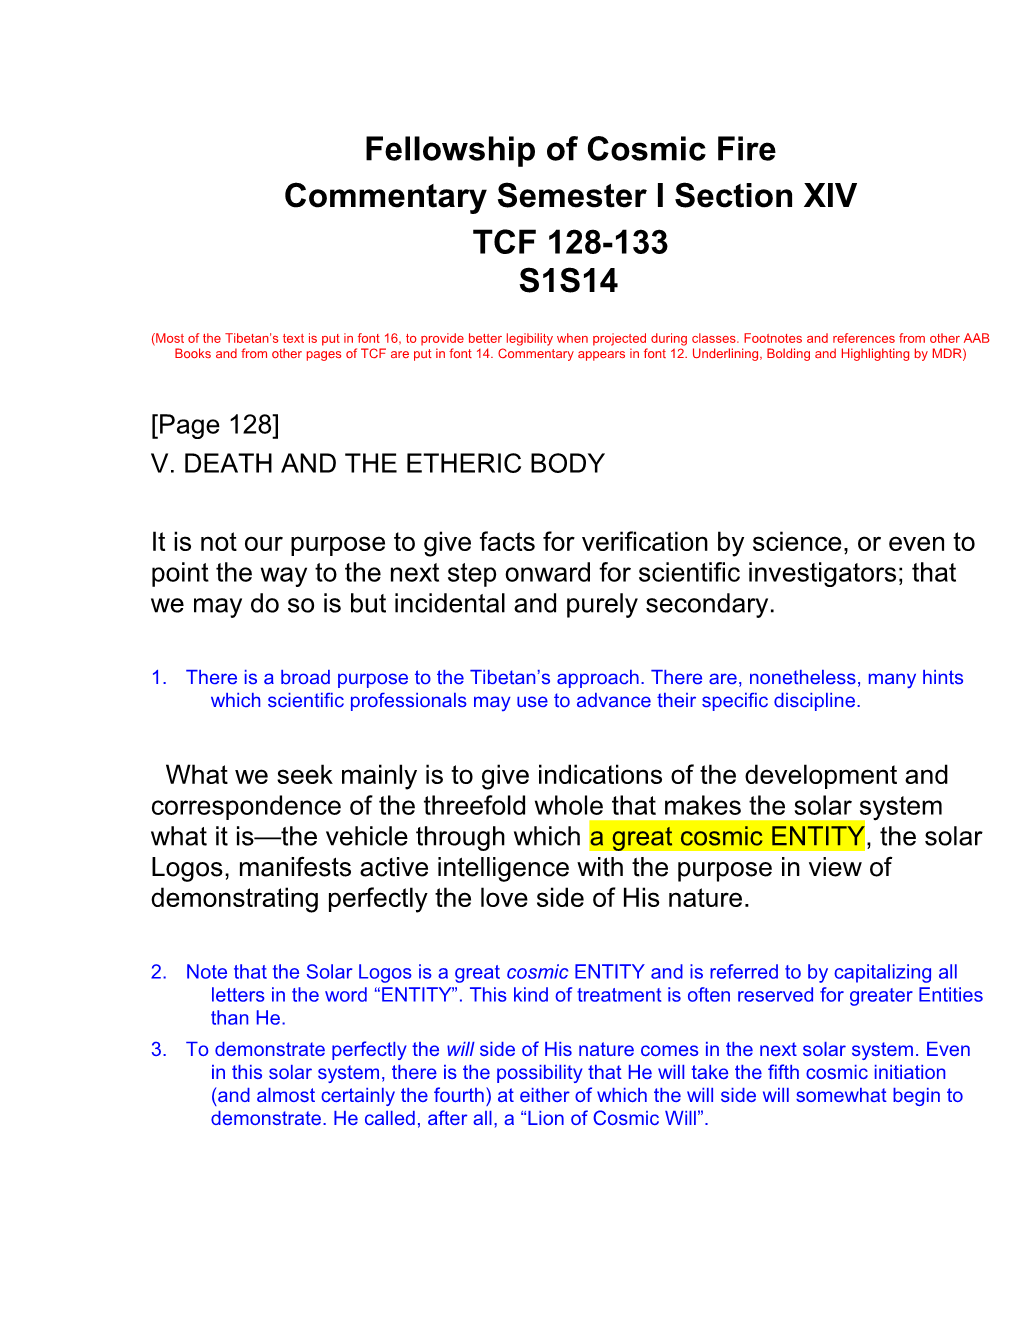 Commentary Semester I Section XIV